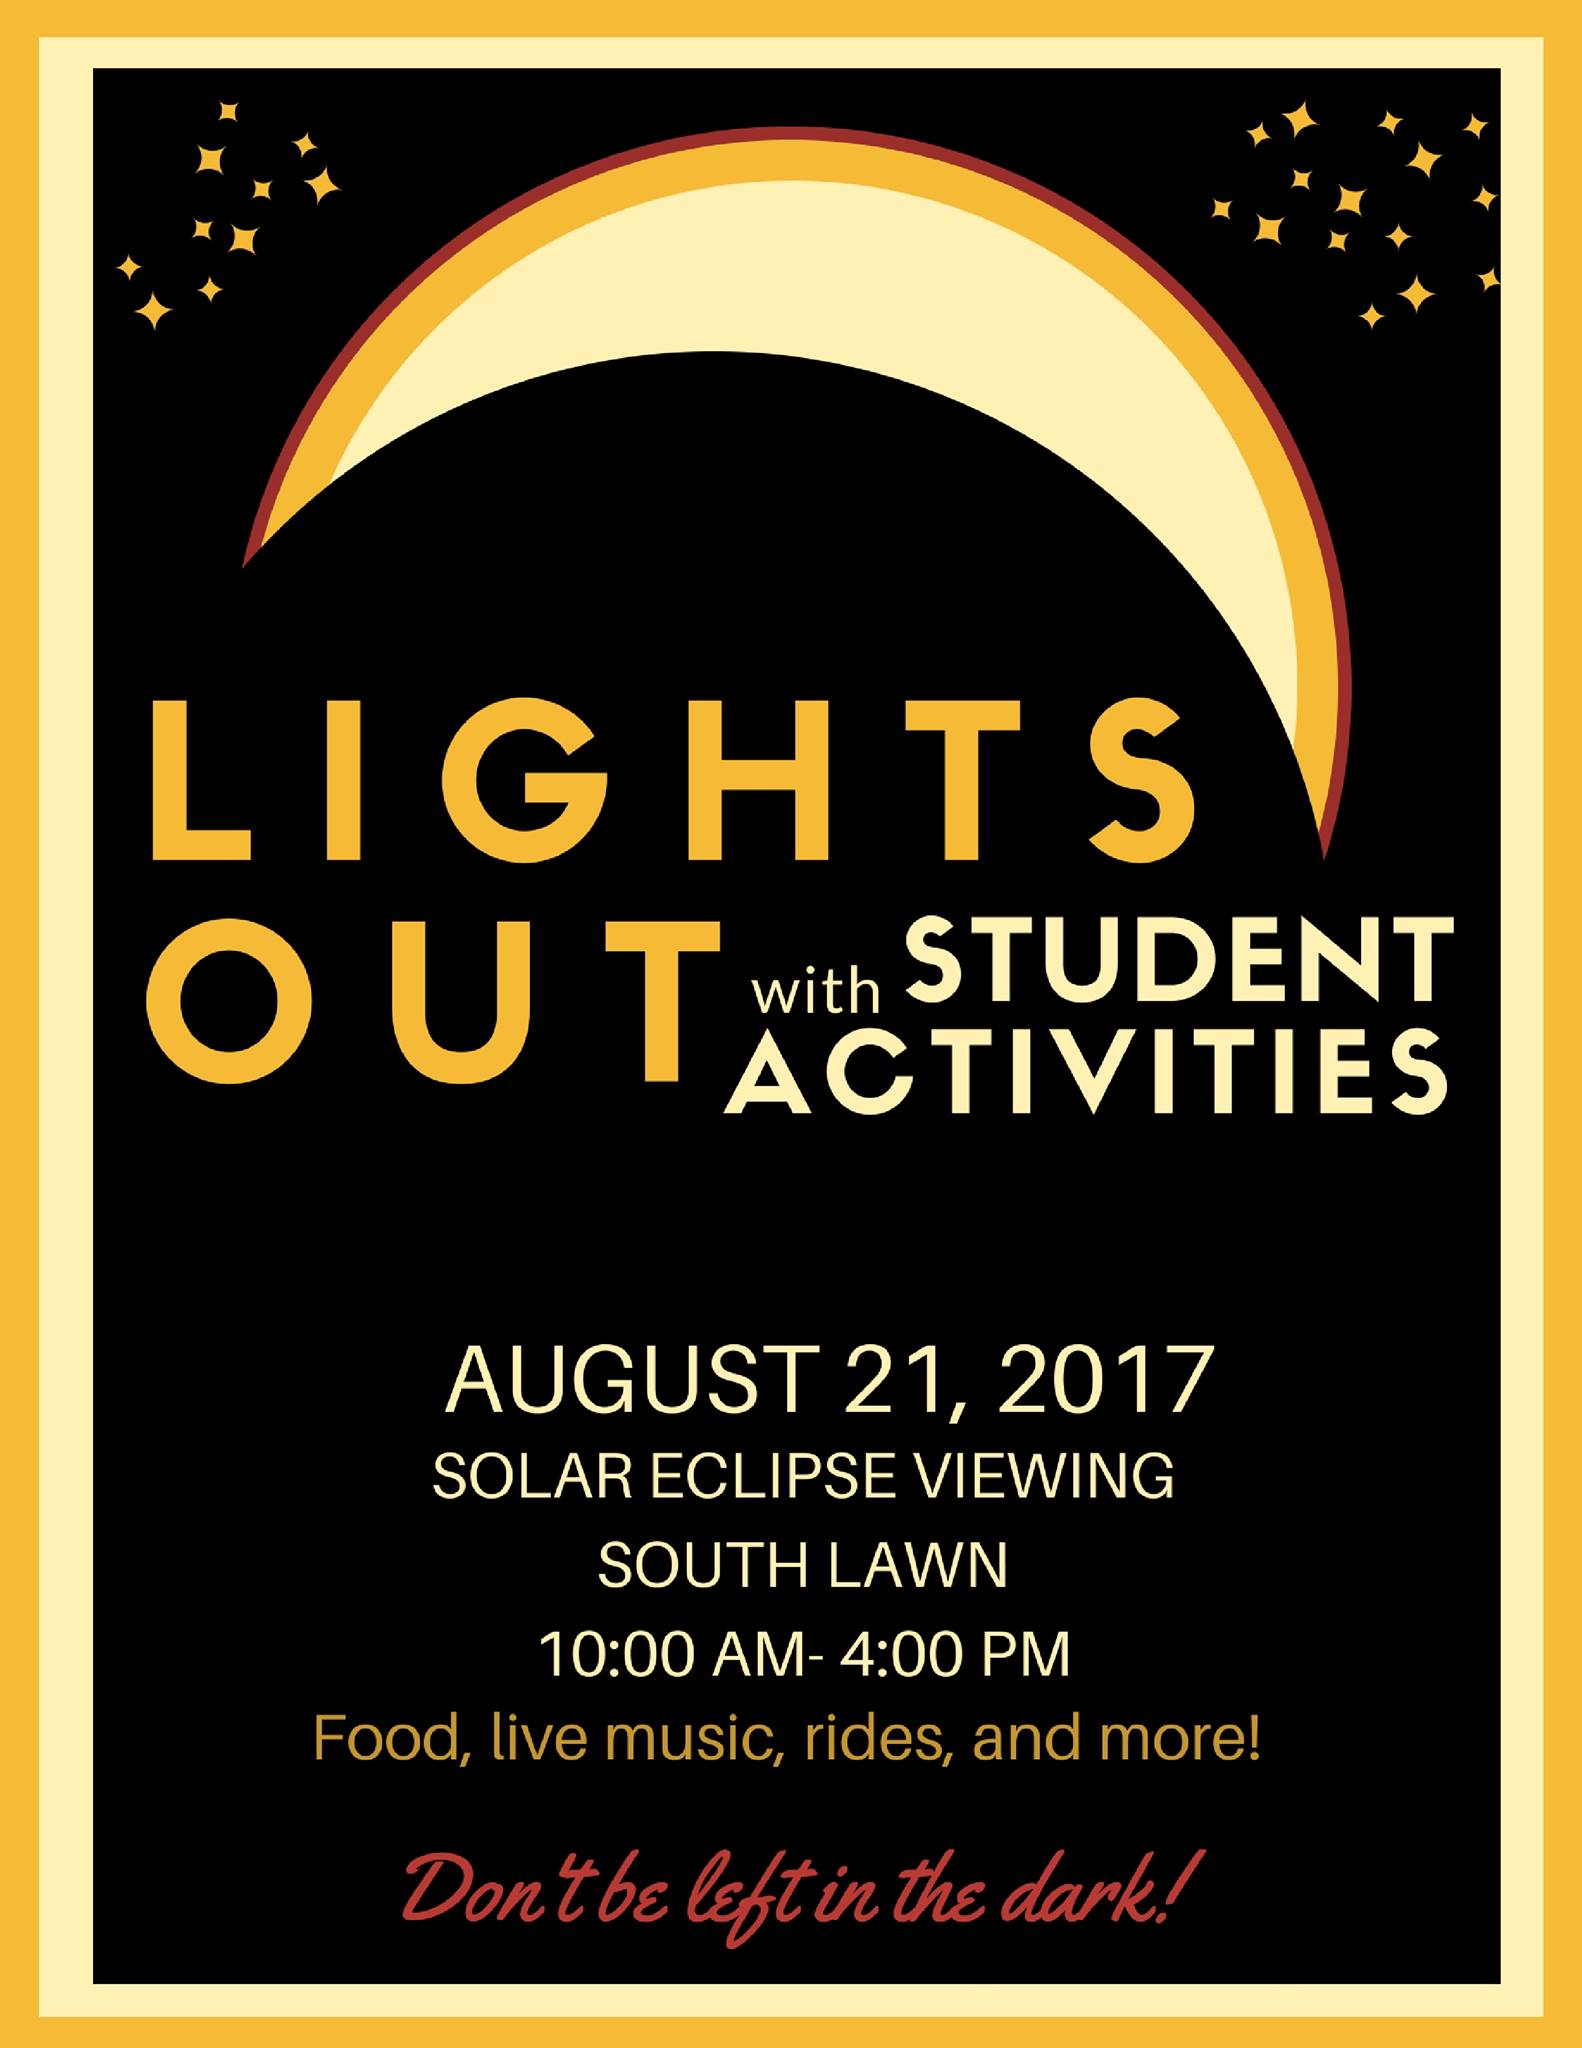 Lights Out with Student Activities. August 21, 2017. Solar Eclipse viewing. South lawn. 10am-4pm. Food, live music, rides, and more. Don't be left in the dark!